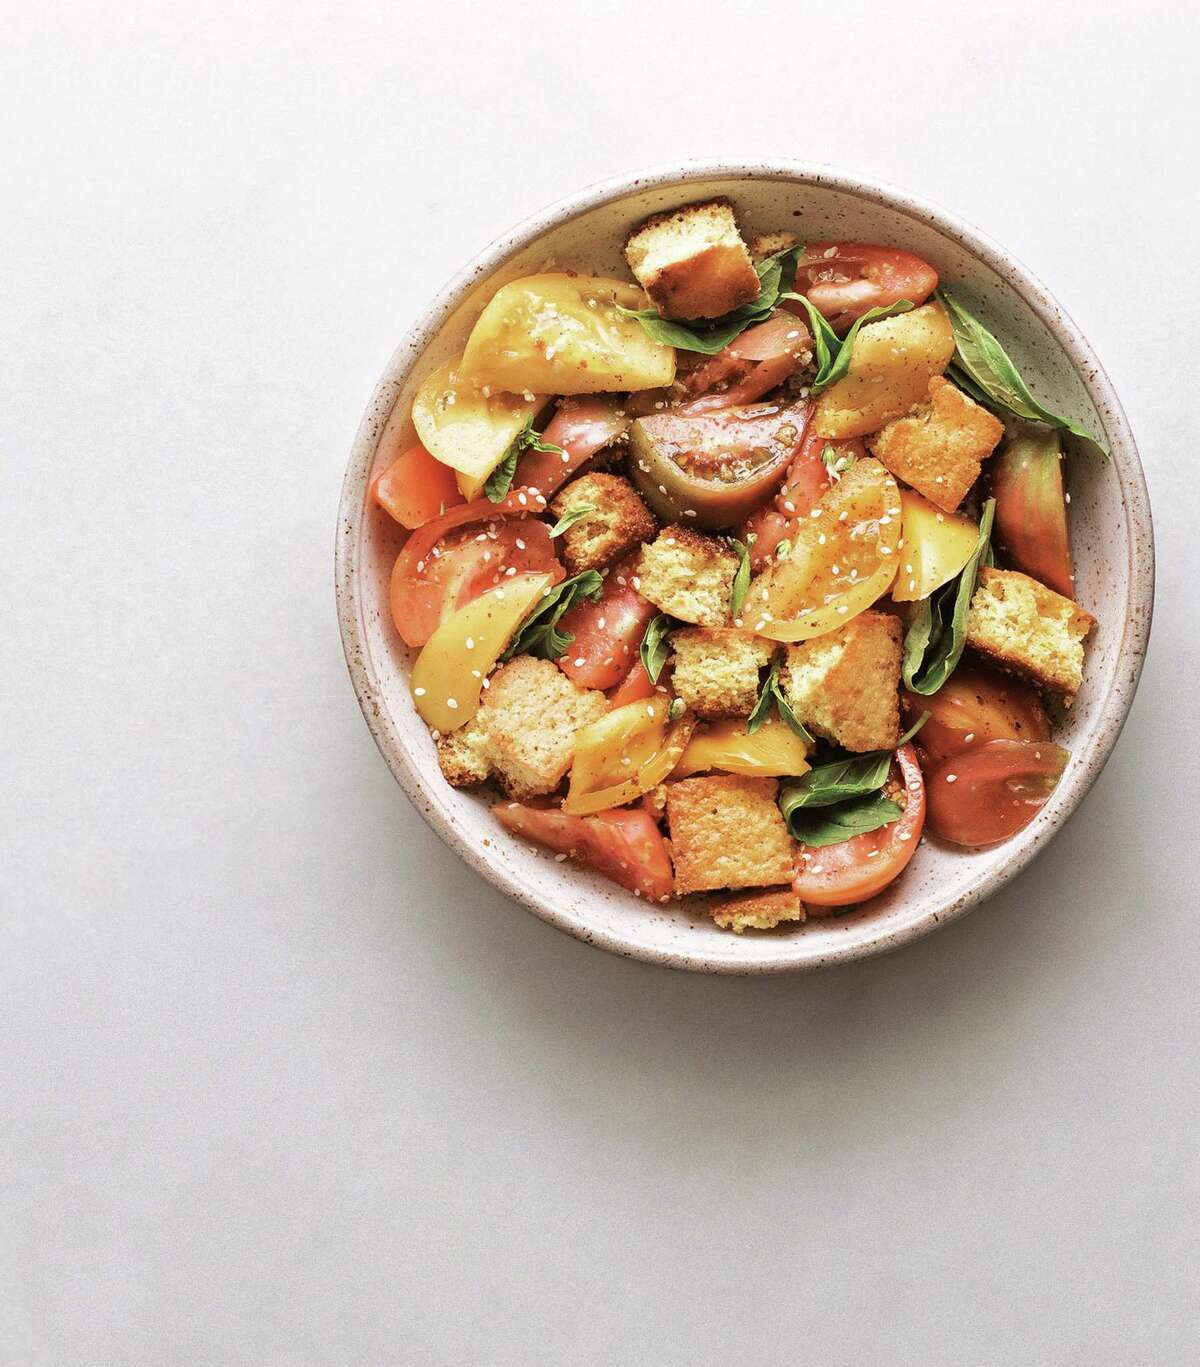 Sesame Heirloom Tomato Salad with Za’atar - Corn Bread Croutons (recipe in column). Corn and tomatoes have a natural affinity for each other.